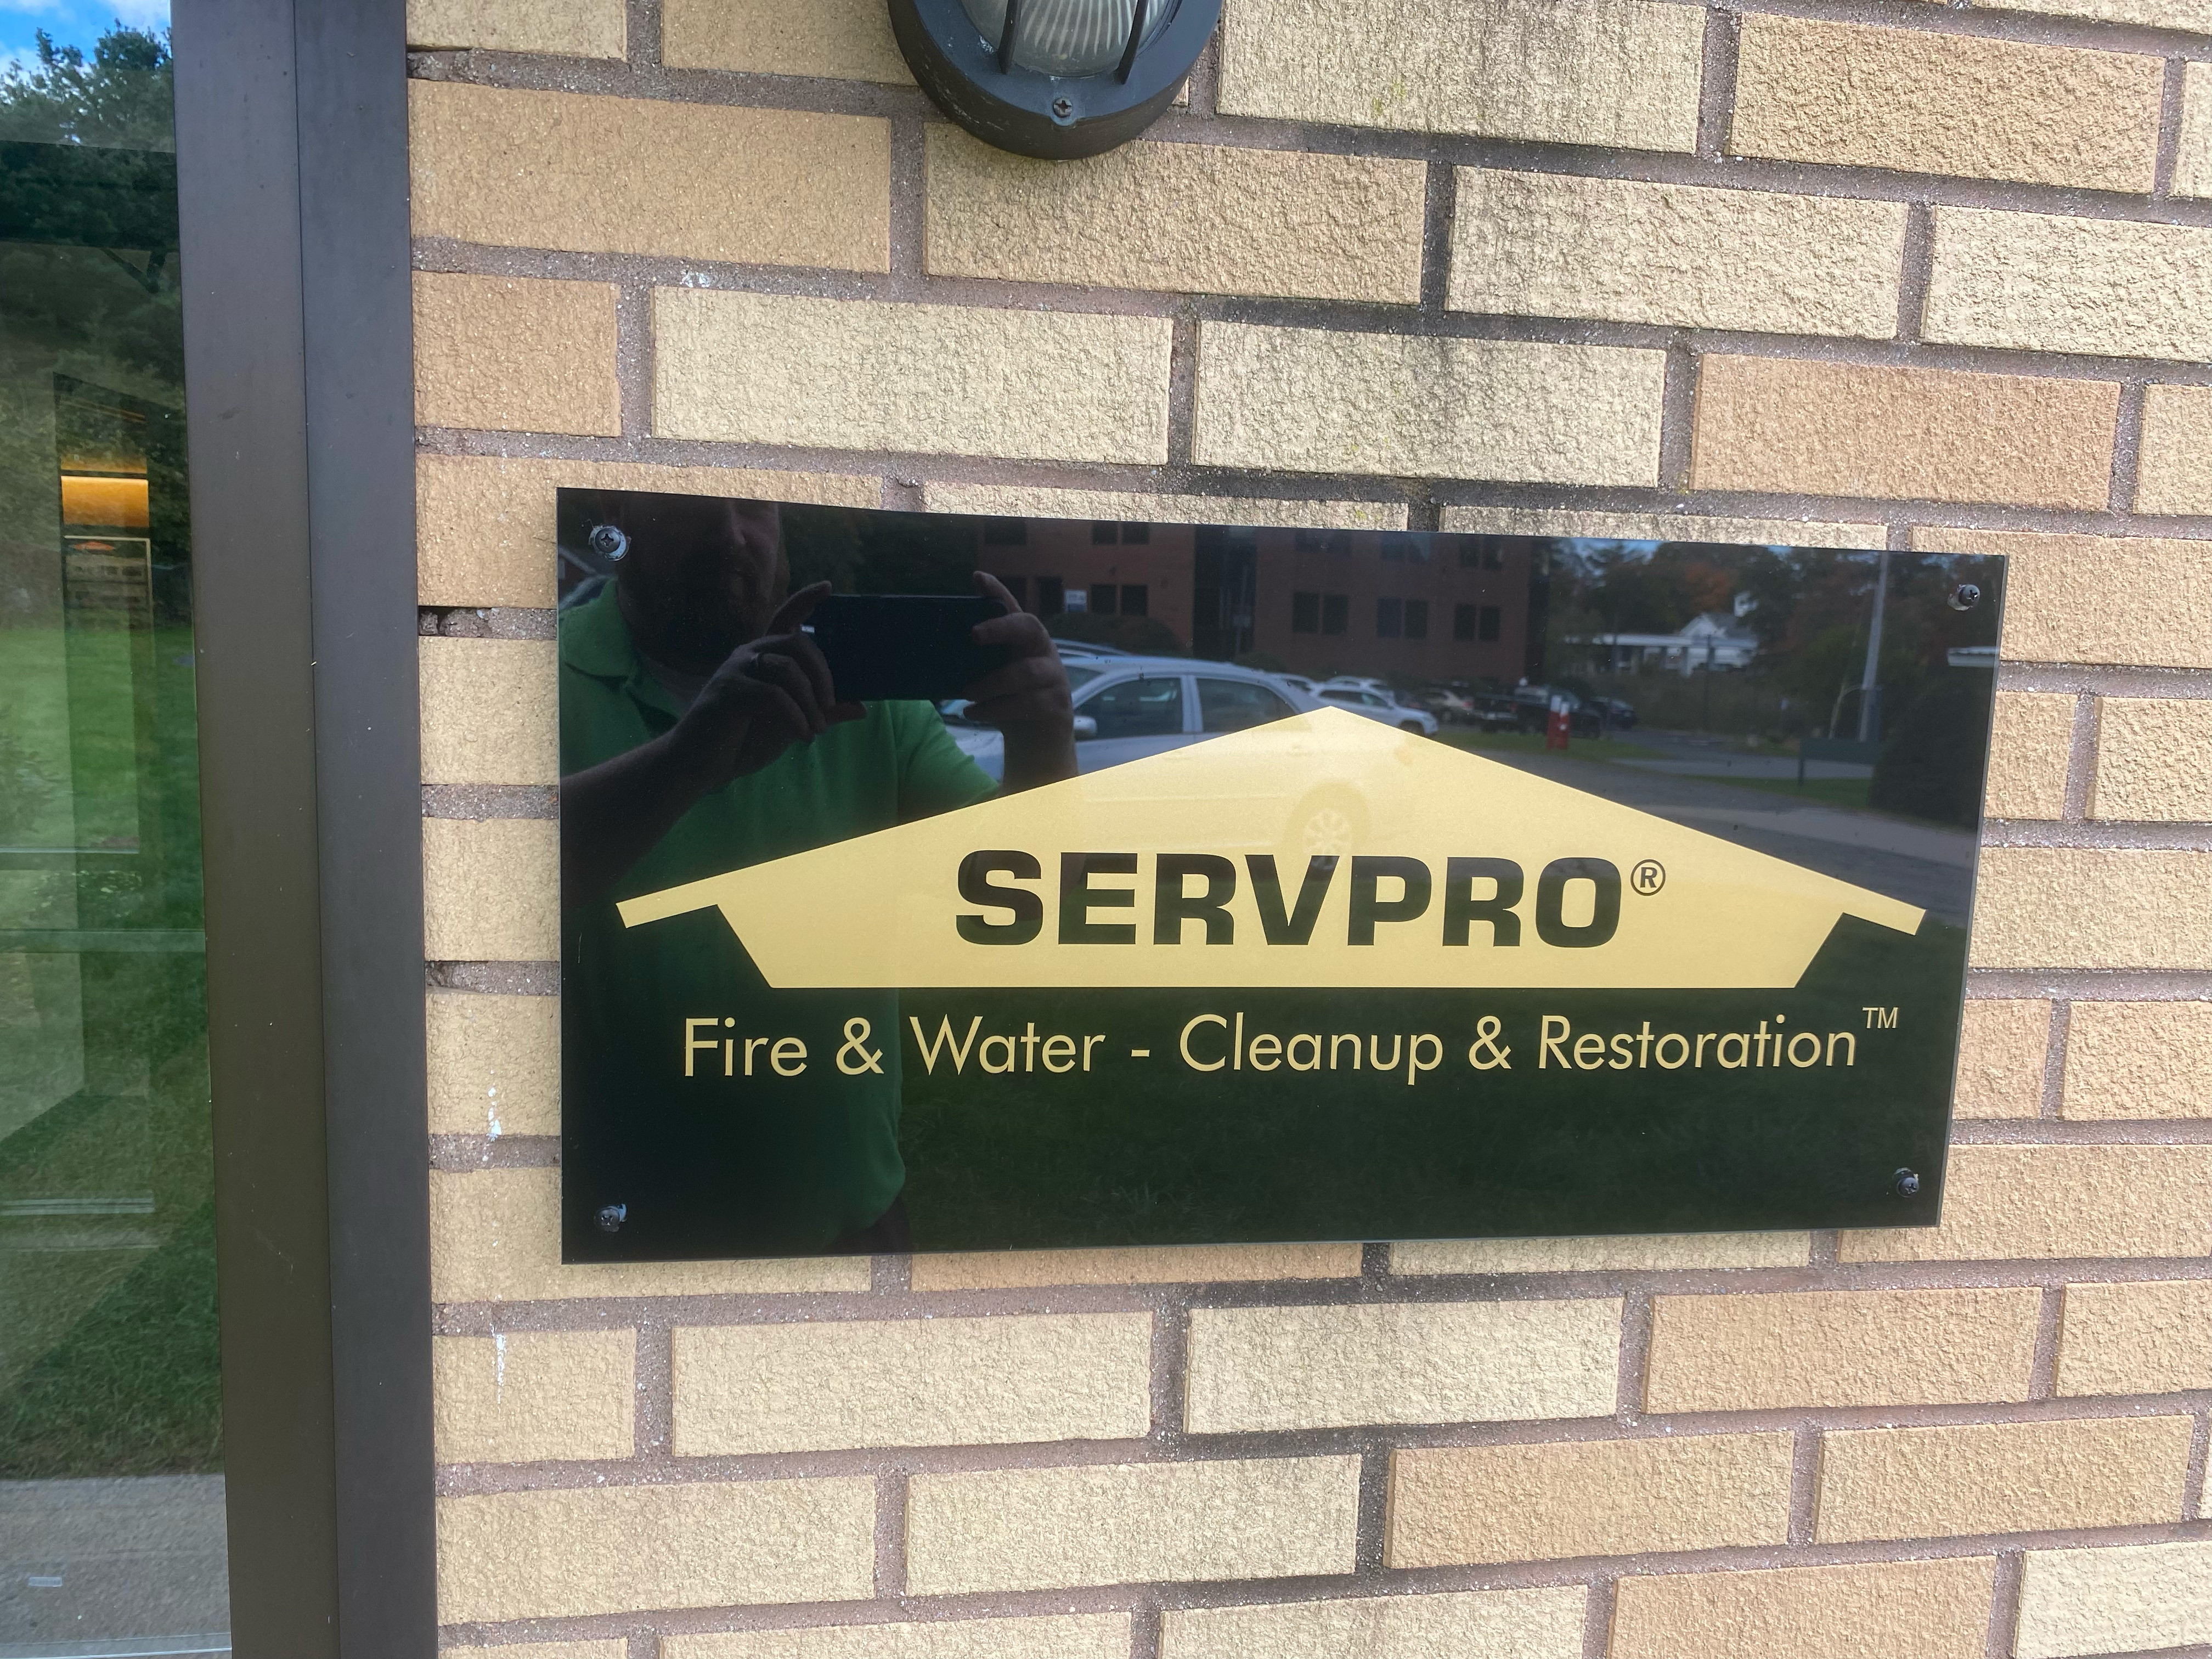 Both the Disaster Remediation and Rebuild Teams of SERVPRO of Framingham are highly skilled and professional. Our certified technicians and licensed contractors will be there for you throughout the entire project life-cycle.  They will collaborate with you, keep you informed and make sure that your expectations are met.